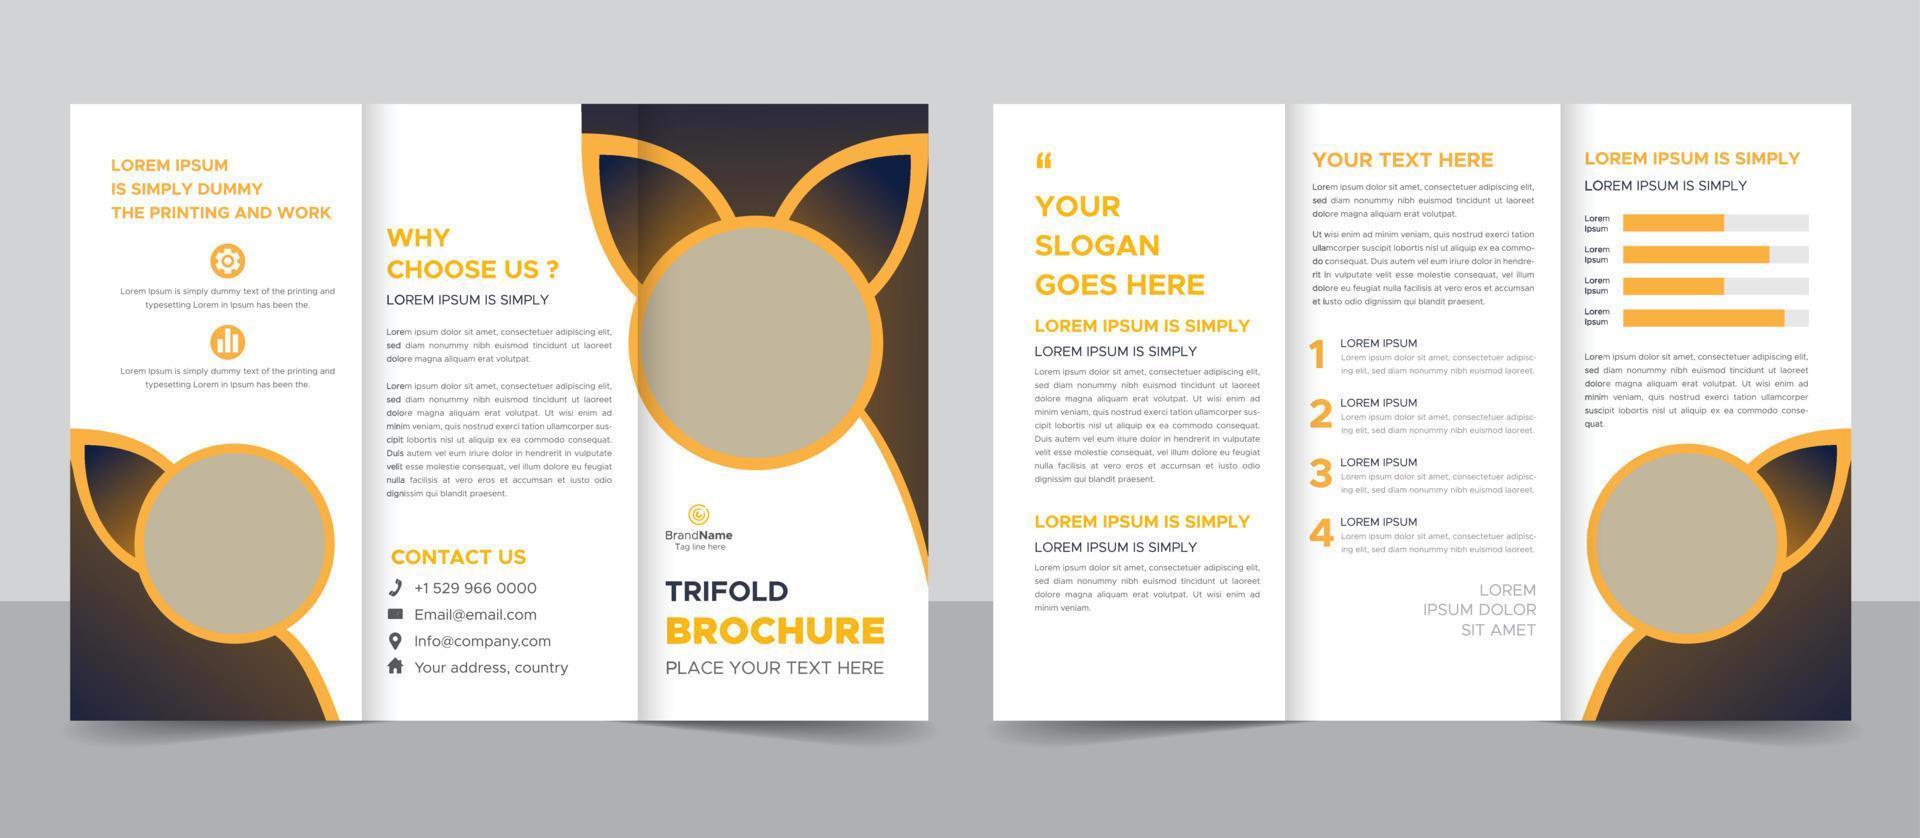 Corporate Modern And Professional Trifold Brochure Template. vector